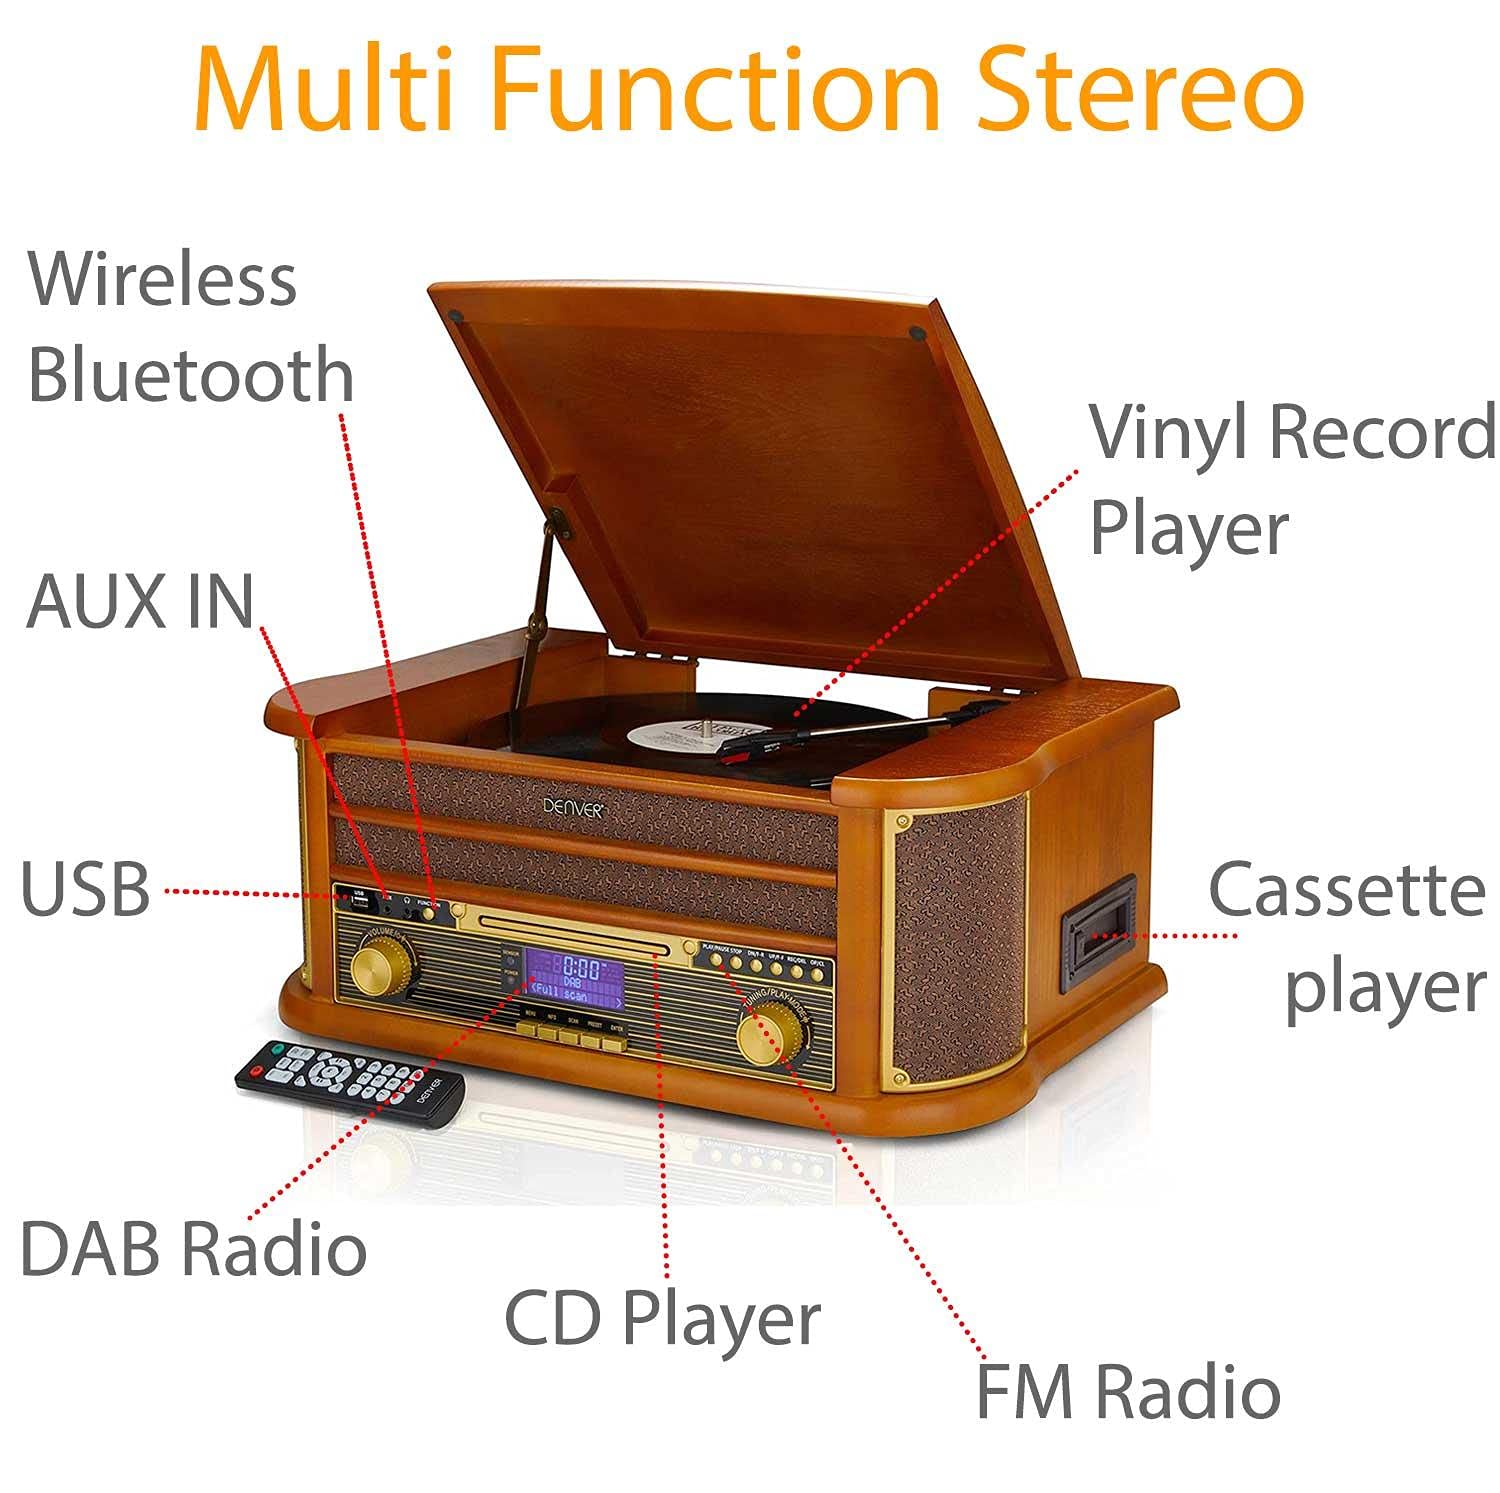 Mua Denver 9-in-1 Retro Vintage Wooden Record Player With Speakers &  Bluetooth – 3 Speed Vinyl & Cassette With CD Player, DAB+ Radio, FM, AUX  IN, MP3 USB Recording, AUX IN And